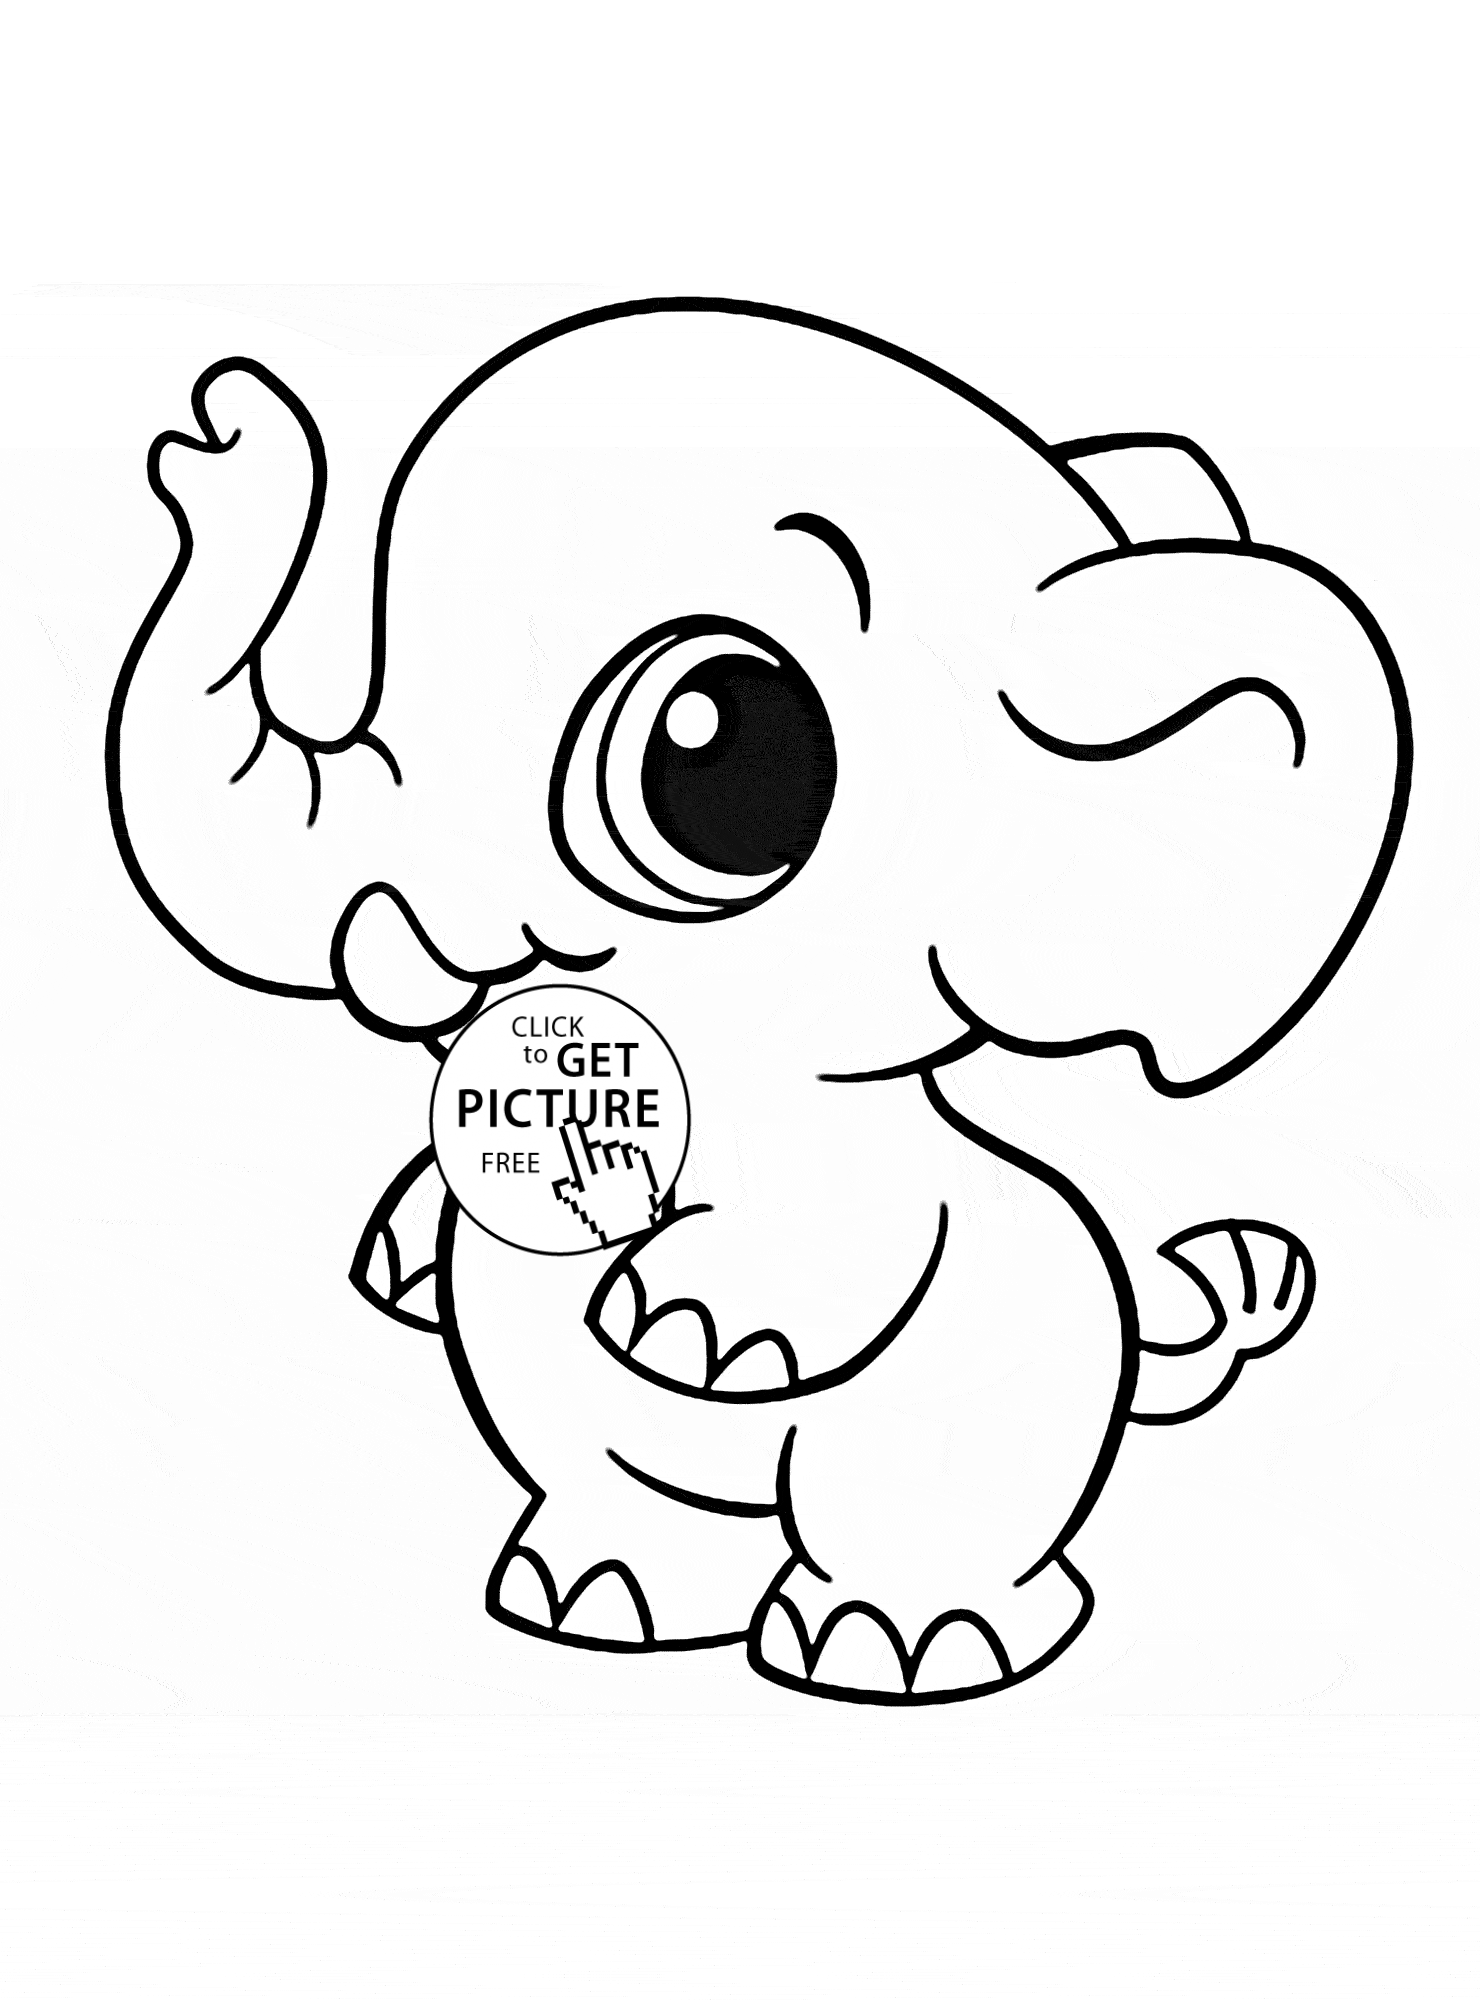 cute animal coloring sheets coloring pages cute animal coloring pages coloring pages sheets animal cute coloring 